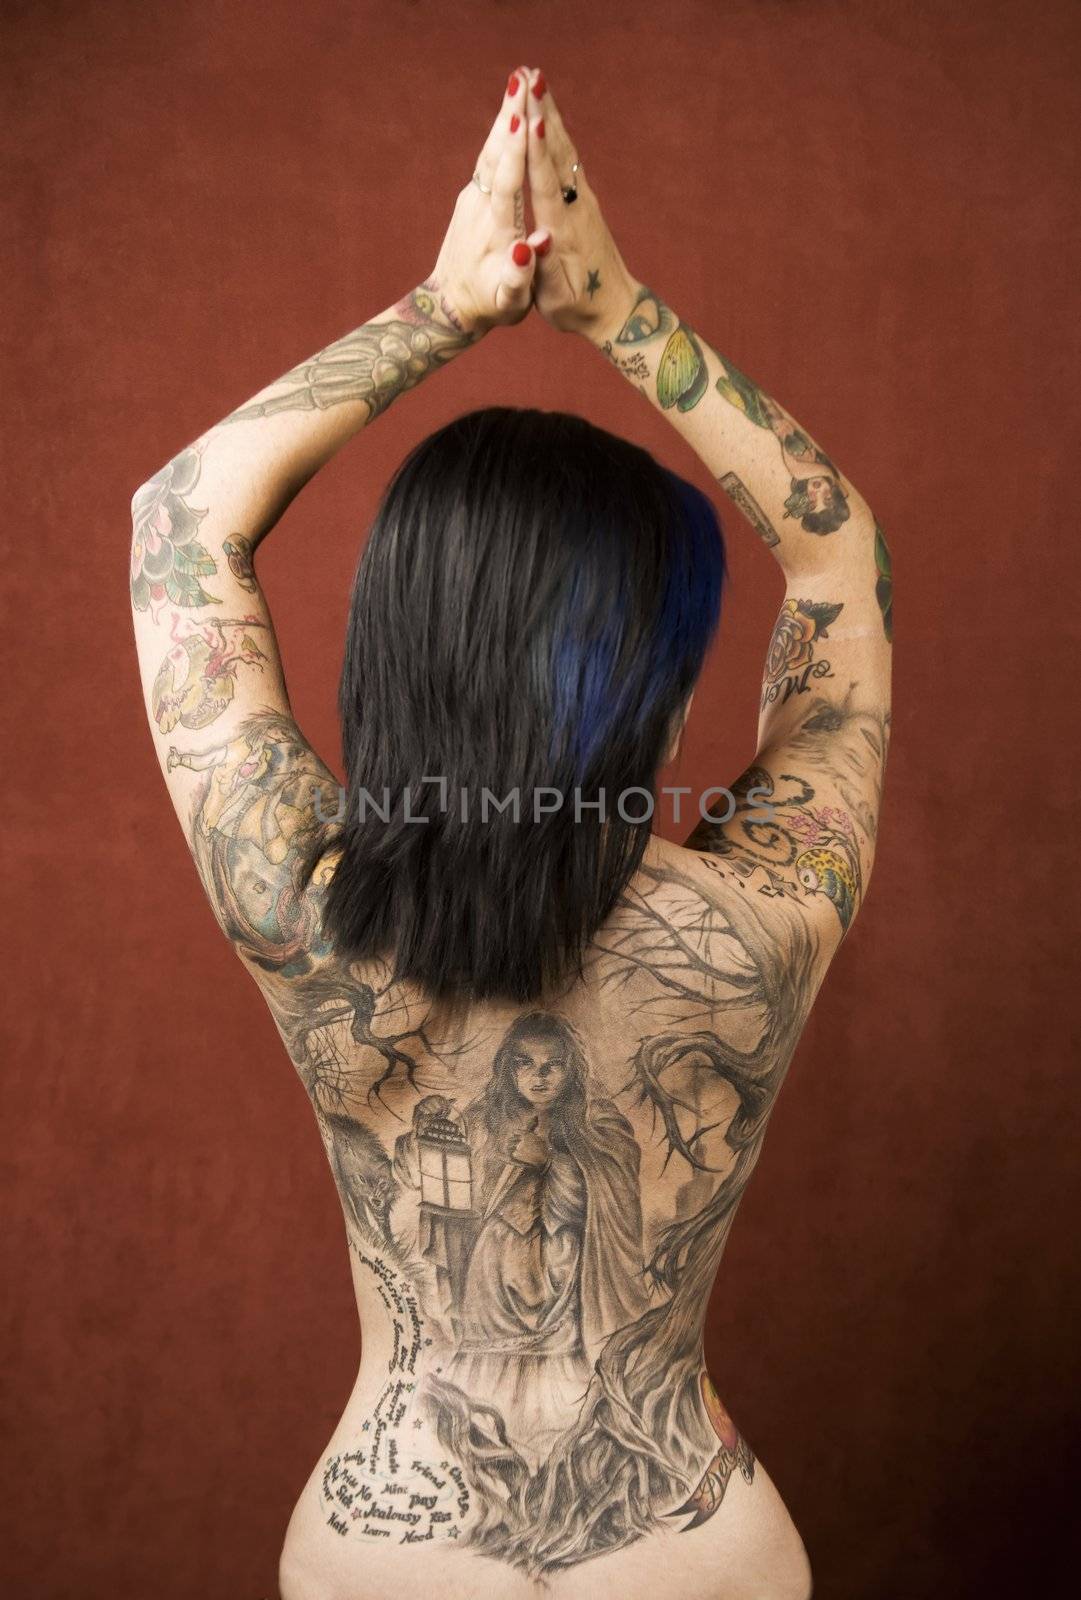 Pretty young woman with many tattoos